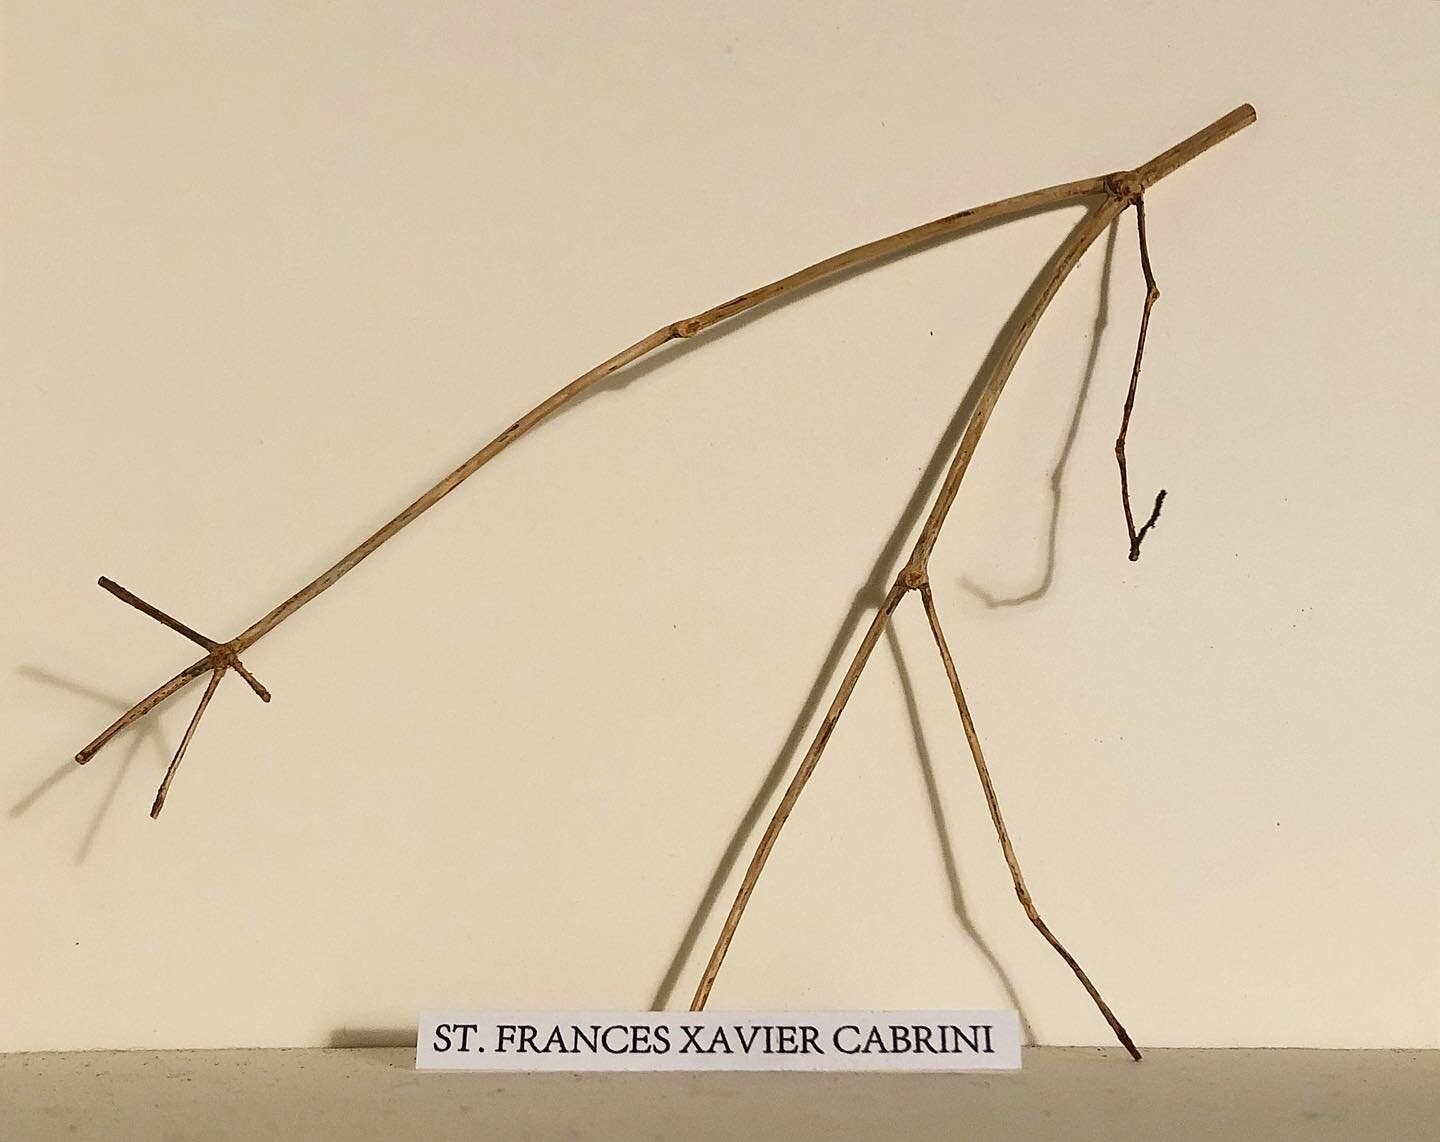 .
St Frances Xavier Cabrini
Saint of the Day 
December 22nd
Frances was the first naturalised citizen of the US to be canonised.
She was born in Lombardy, a sickly child but with evangelical ambitions - she would put little violets in paper boats and